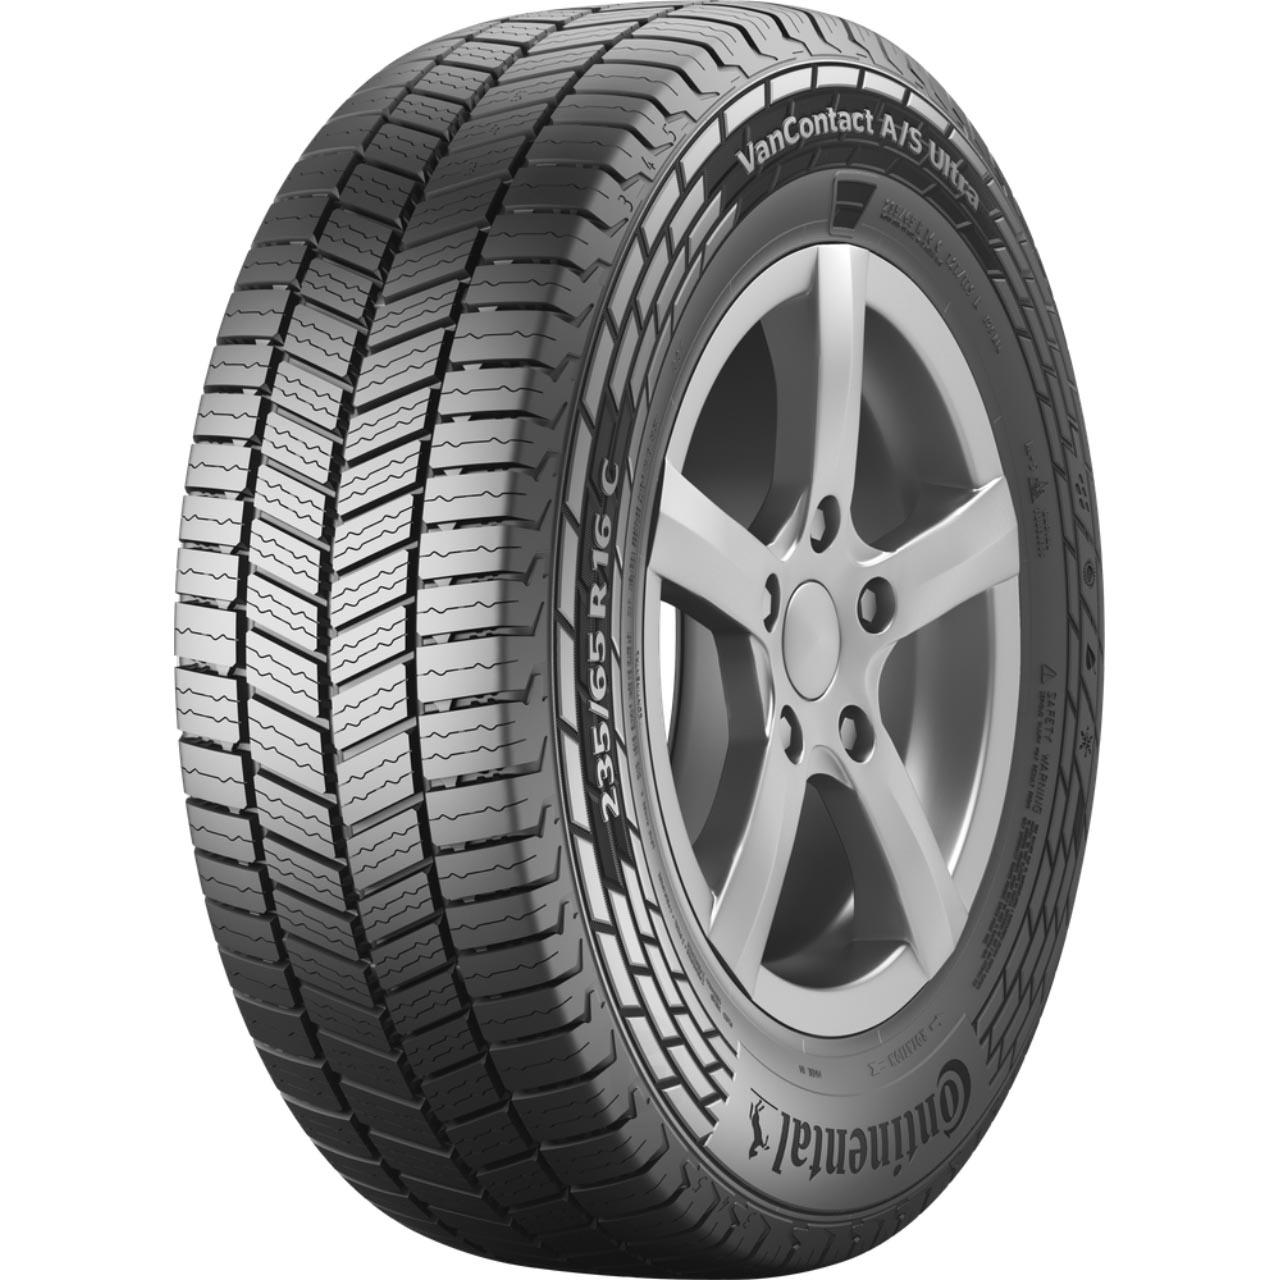 Continental VANCONTACT AS ULTRA 195/75R16C 110/108R